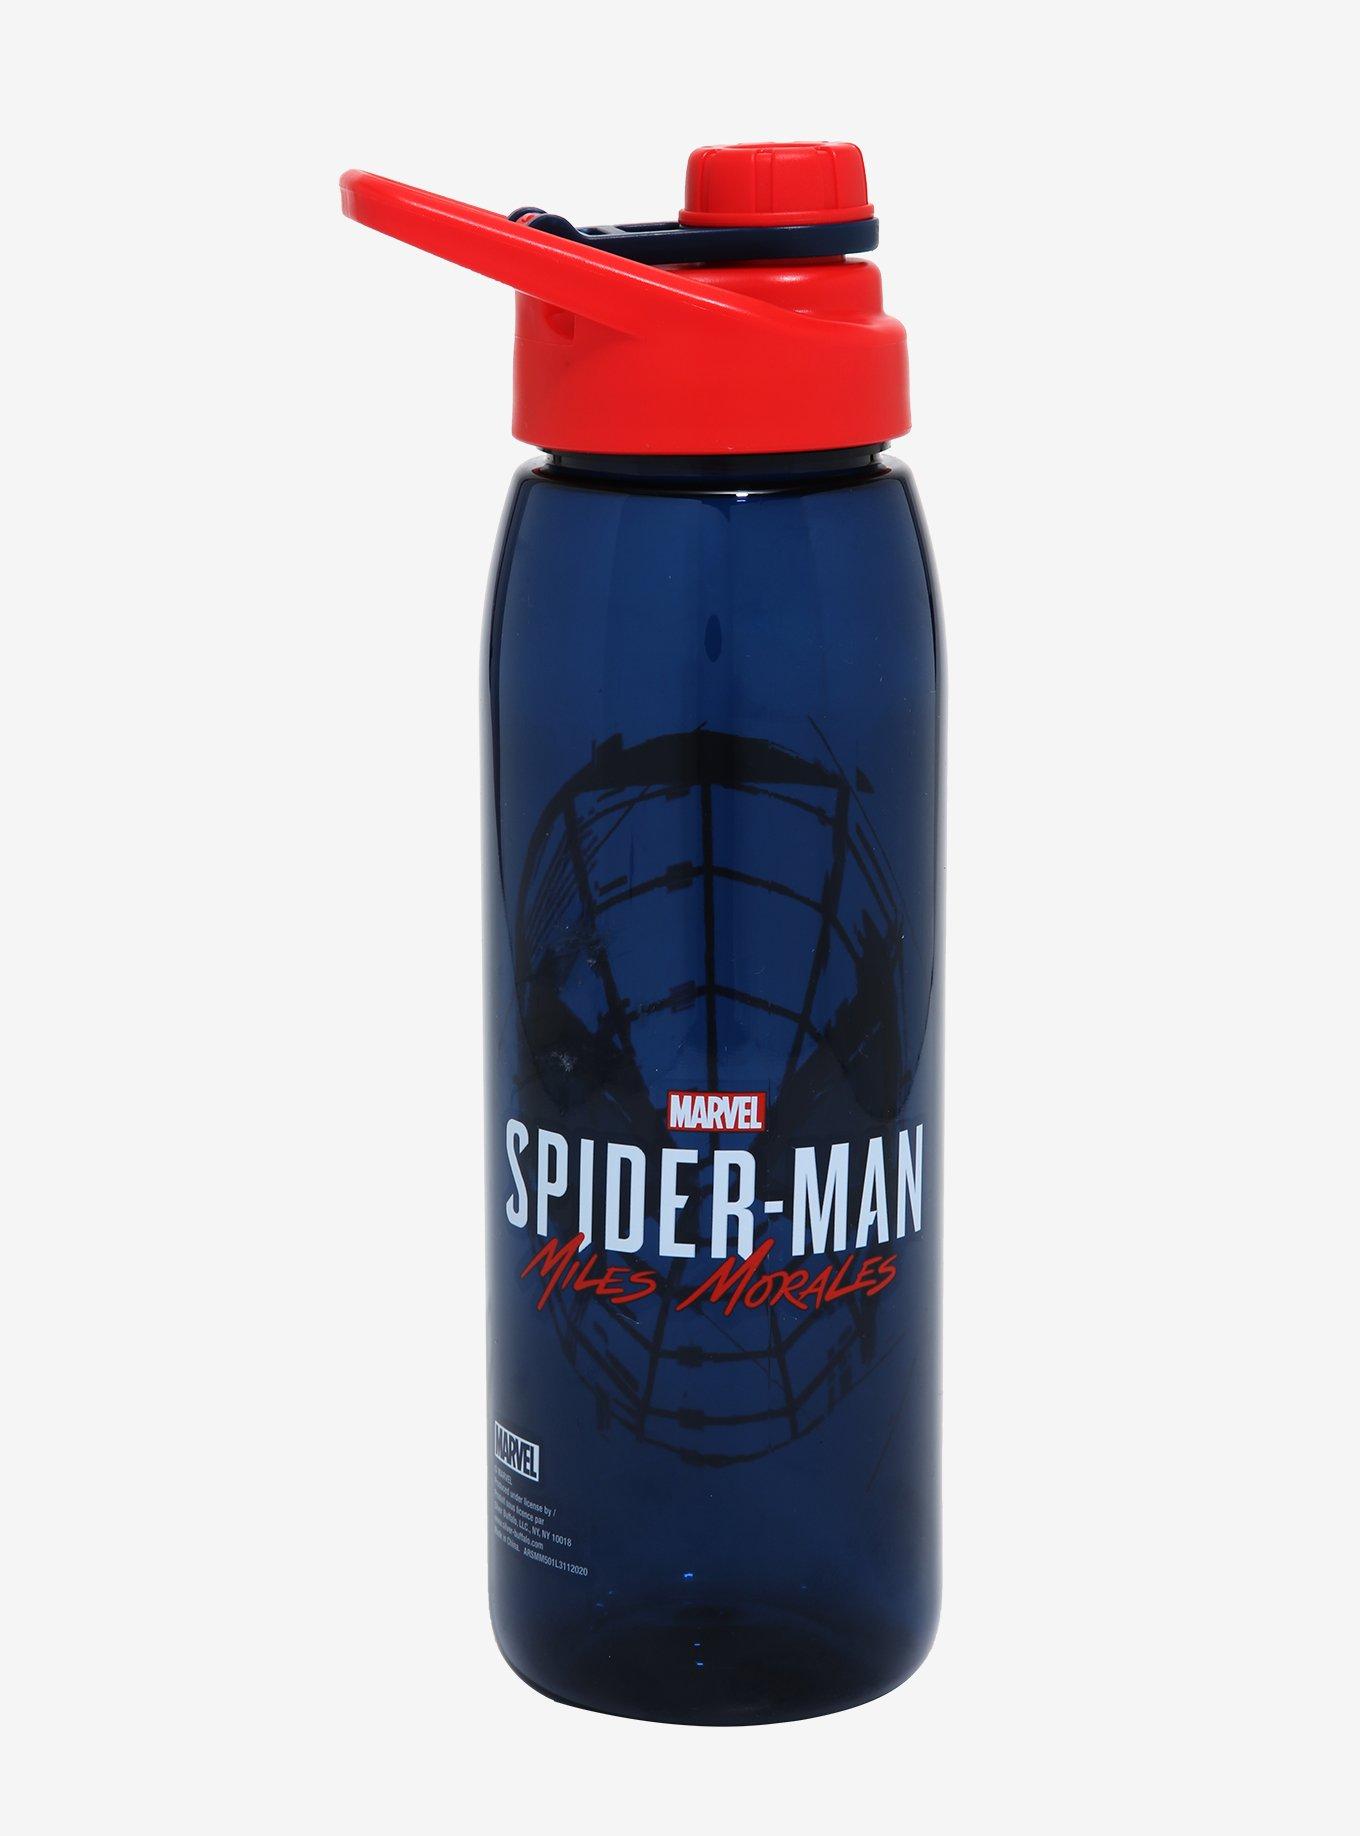 Spider-Man Miles Morales Mask 28 Ounce Water Bottle with Screw Lid